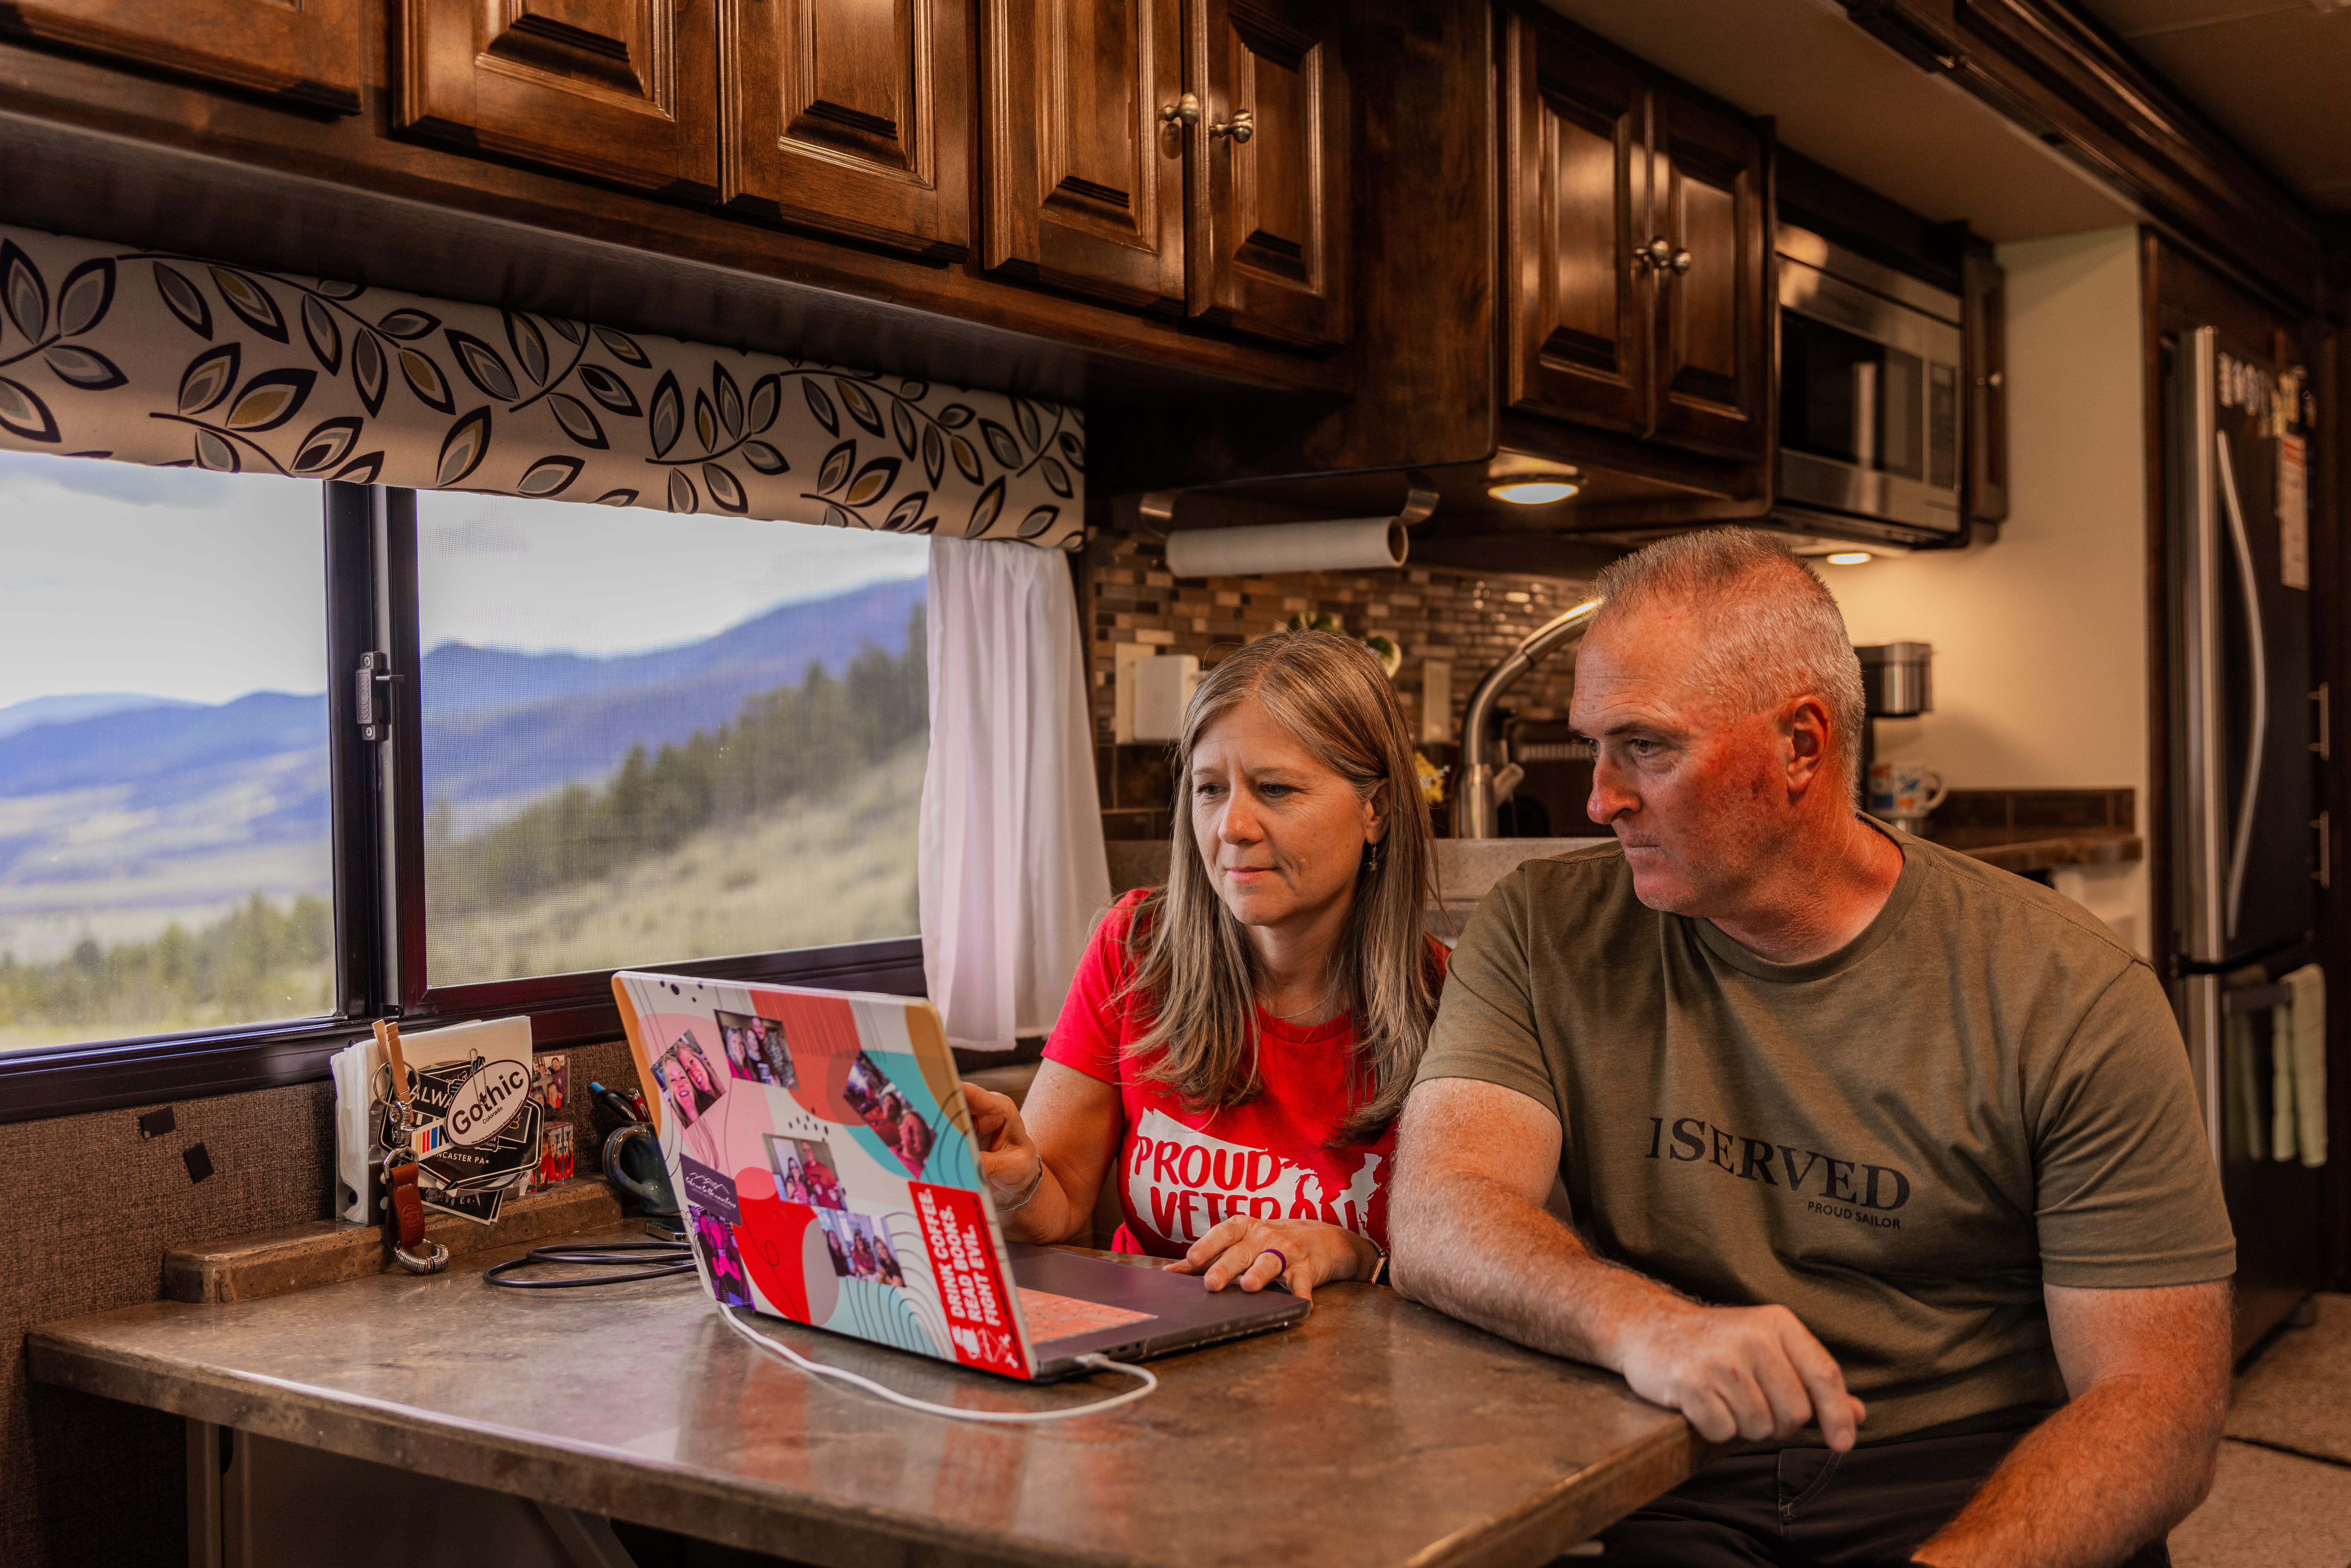 You, Me & The RV Working on a Laptop in Their RV